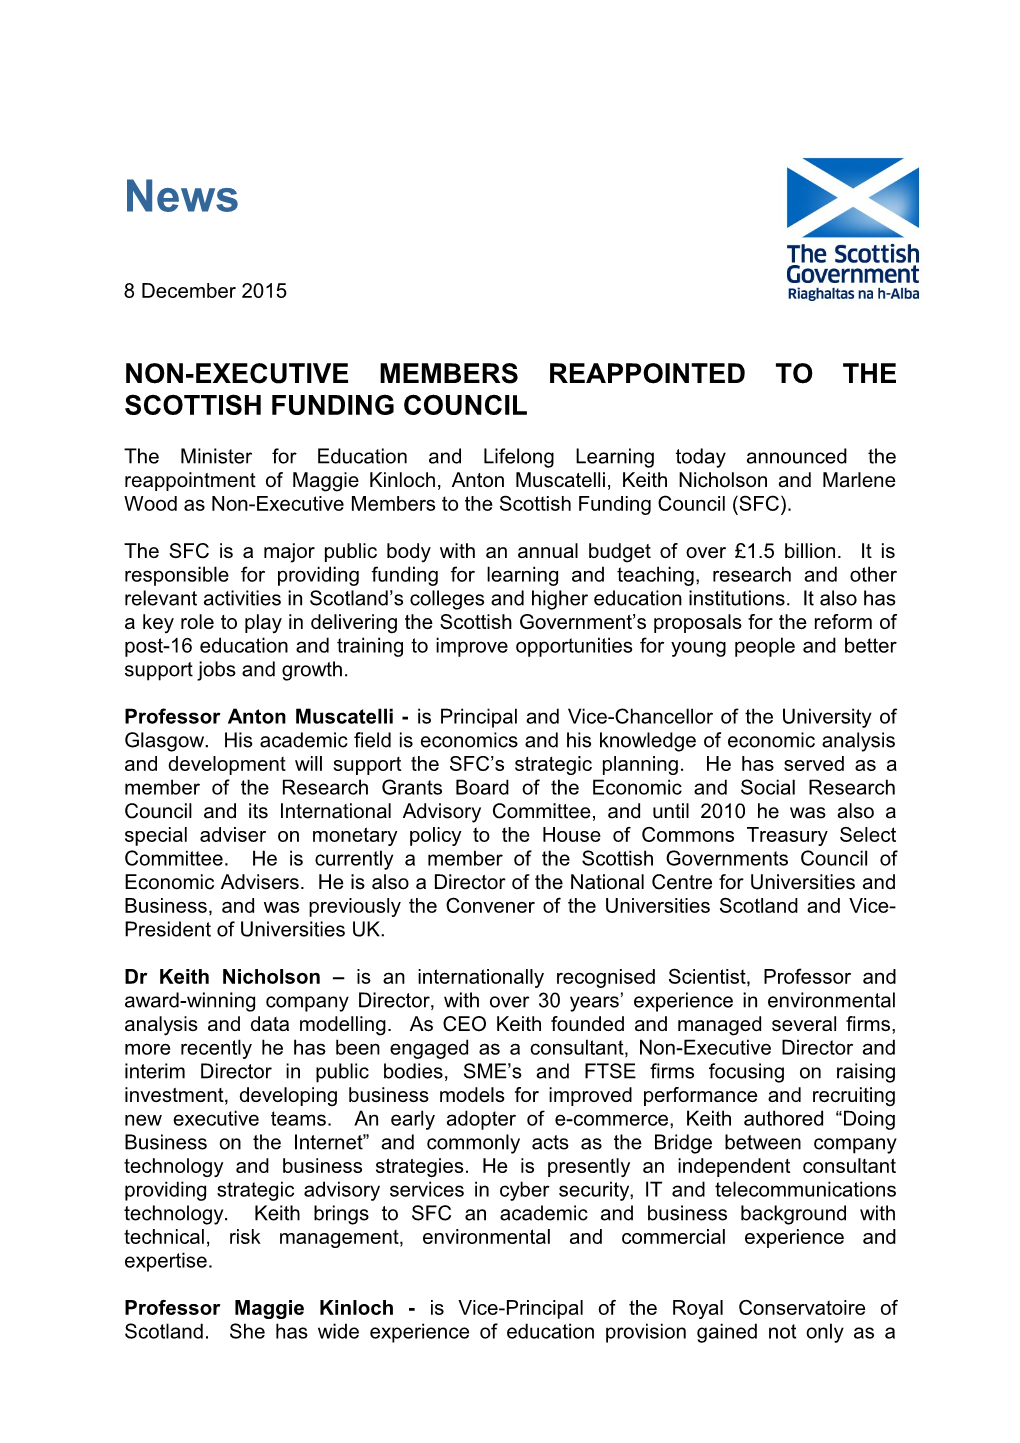 Non-Executive Members Reappointed to the Scottish Funding Council